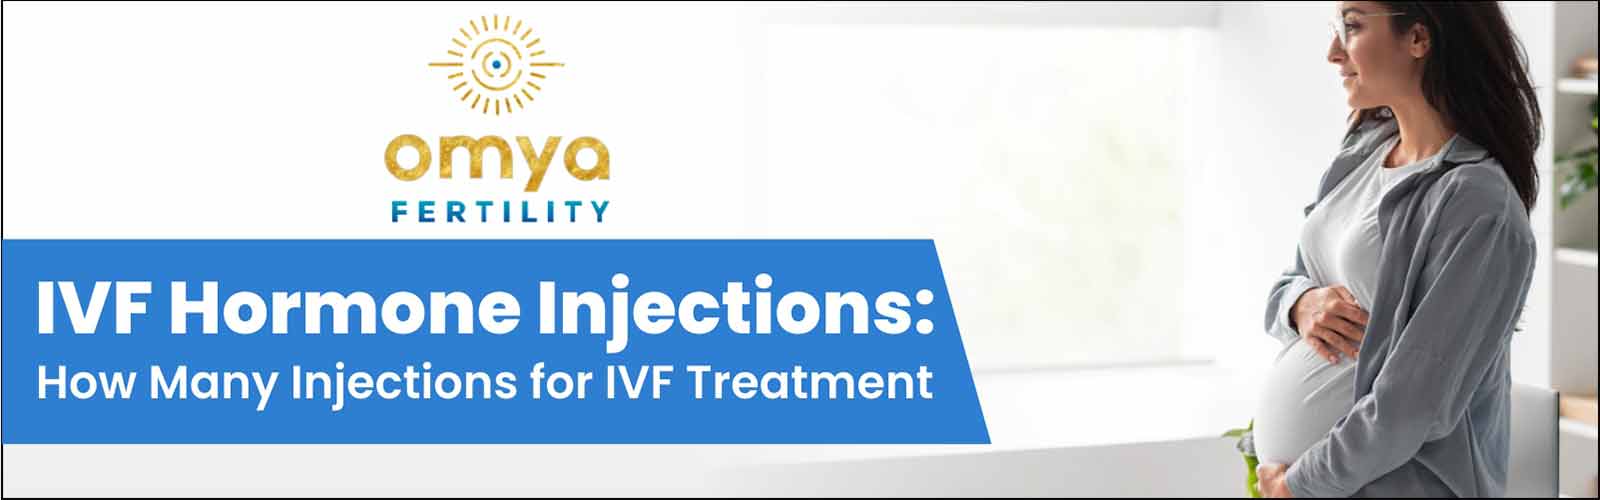 How many injections for IVF treatment?